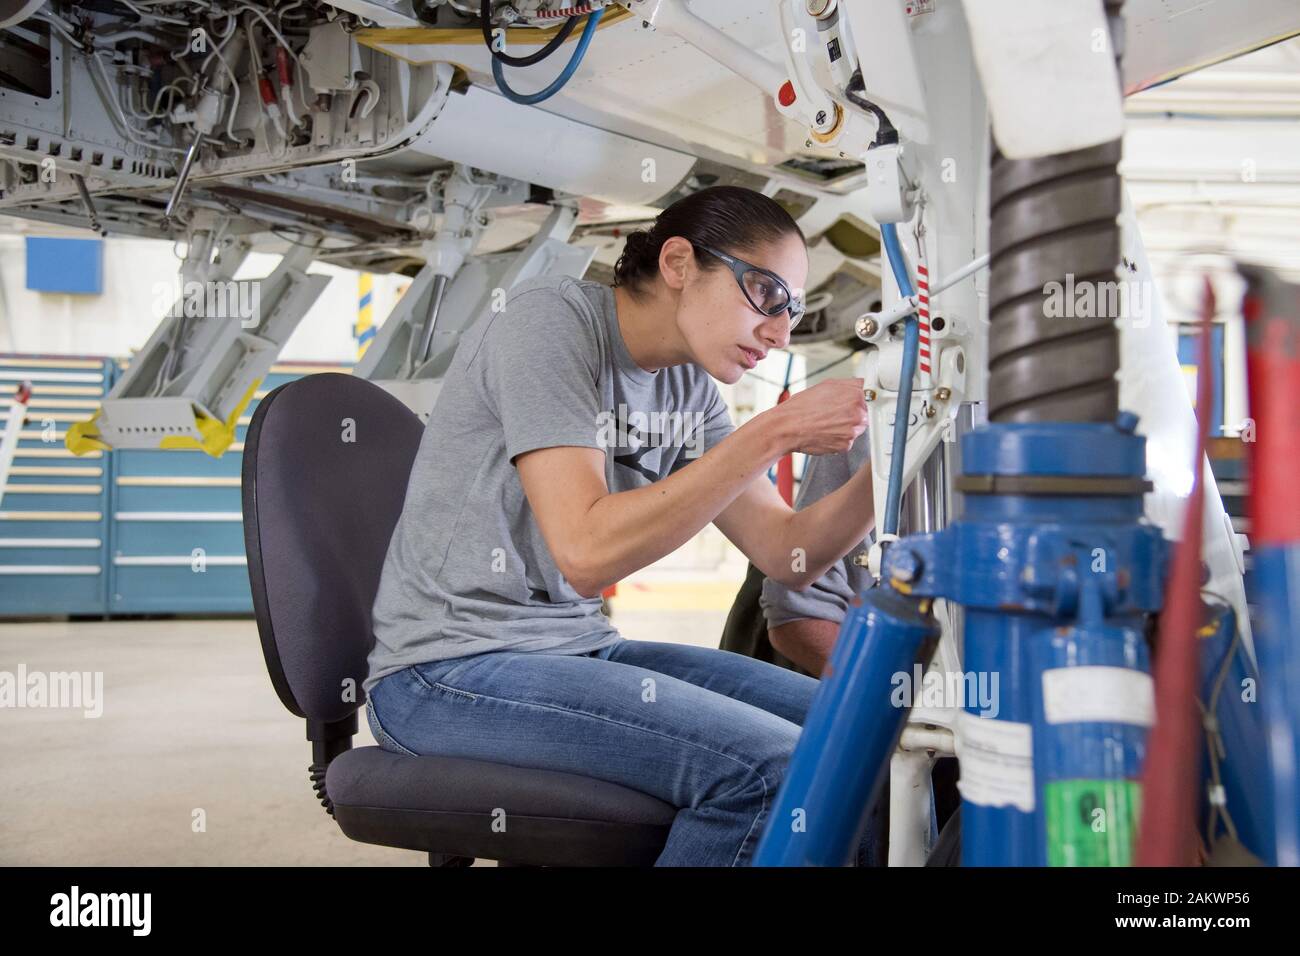 2017 NASA astronaut candidate Jasmin Moghbeli during T-38 engine maintenance training at Ellington Field in Houston on April 09, 2018. NASA is honoring the first class of astronaut candidates to graduate under the Artemis program on January 10, 2019, at the agency's Johnson Space Center in Houston. After completing more than two years of basic training, these candidates will become eligible for spaceflight, including assignments to the International Space Station, Artemis missions to the Moon, and, ultimately, missions to Mars. Stock Photo